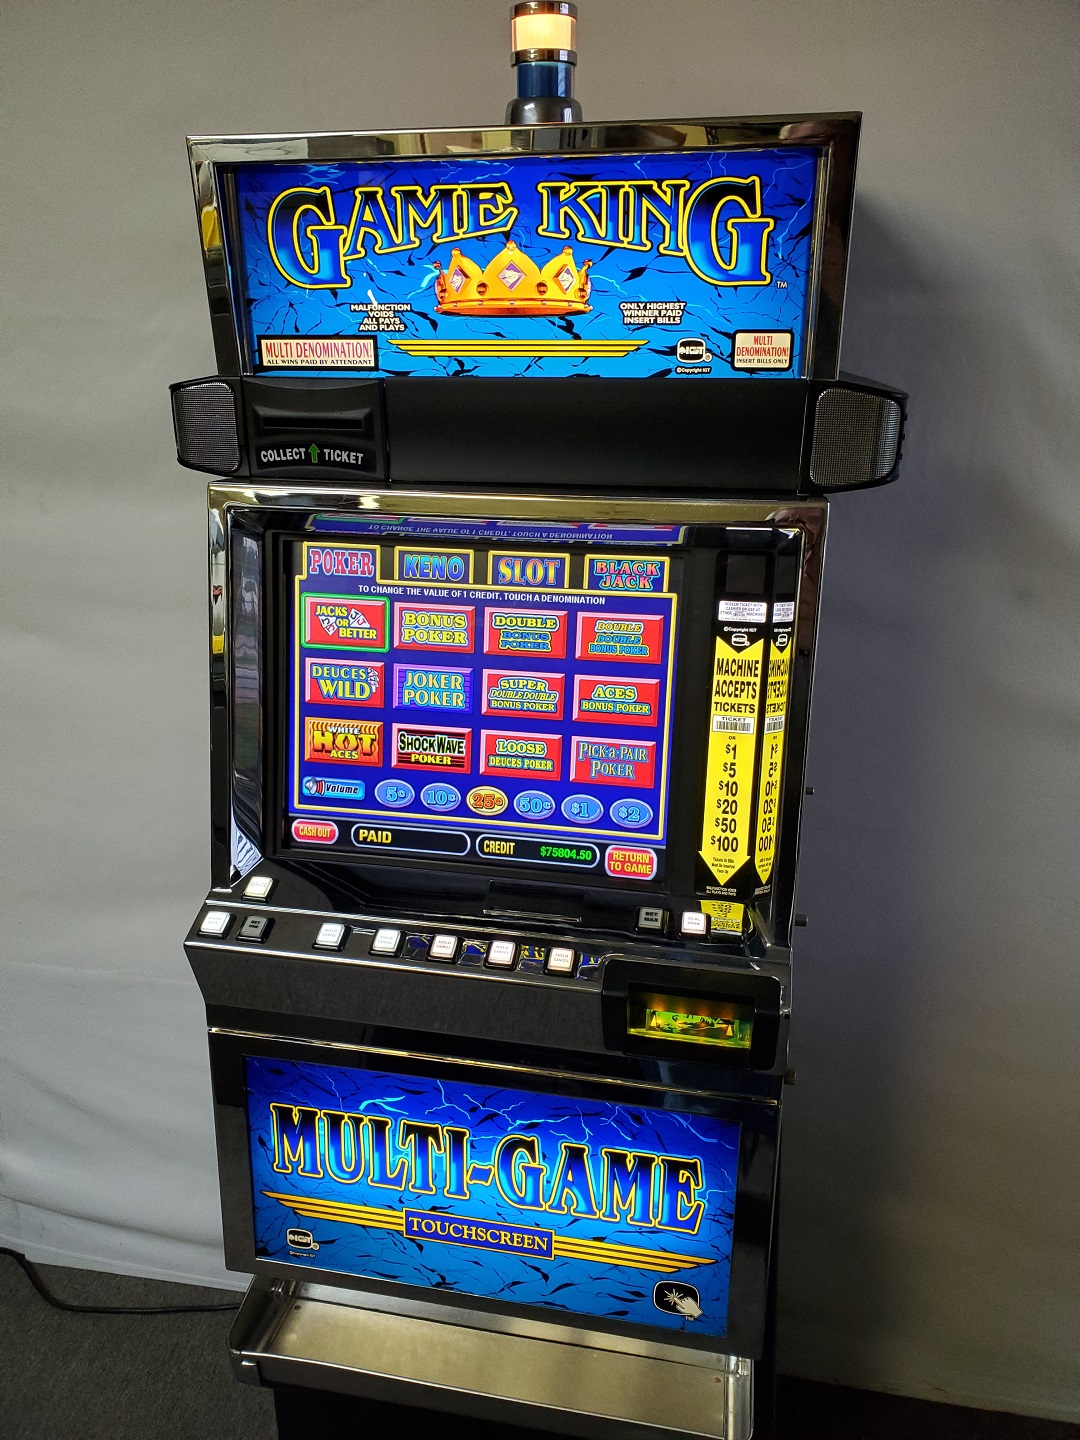 Purchase Your Favorite Game at GameKing with Multi Game Card